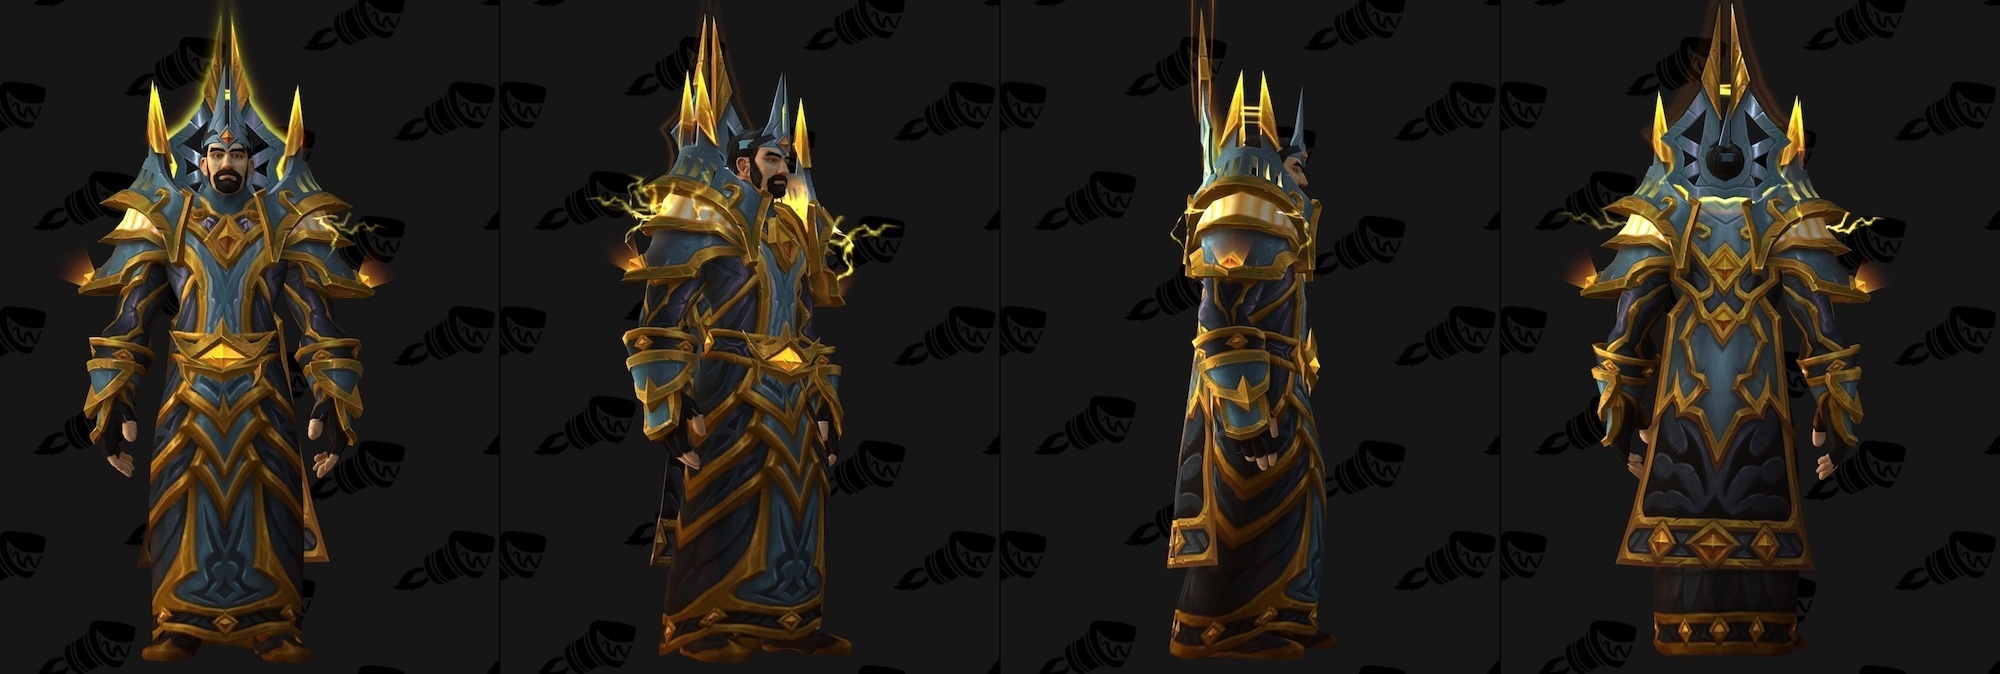 In-depth preview of Mage Tier 20 Armor, Regalia of the Arcane Tempest, from...